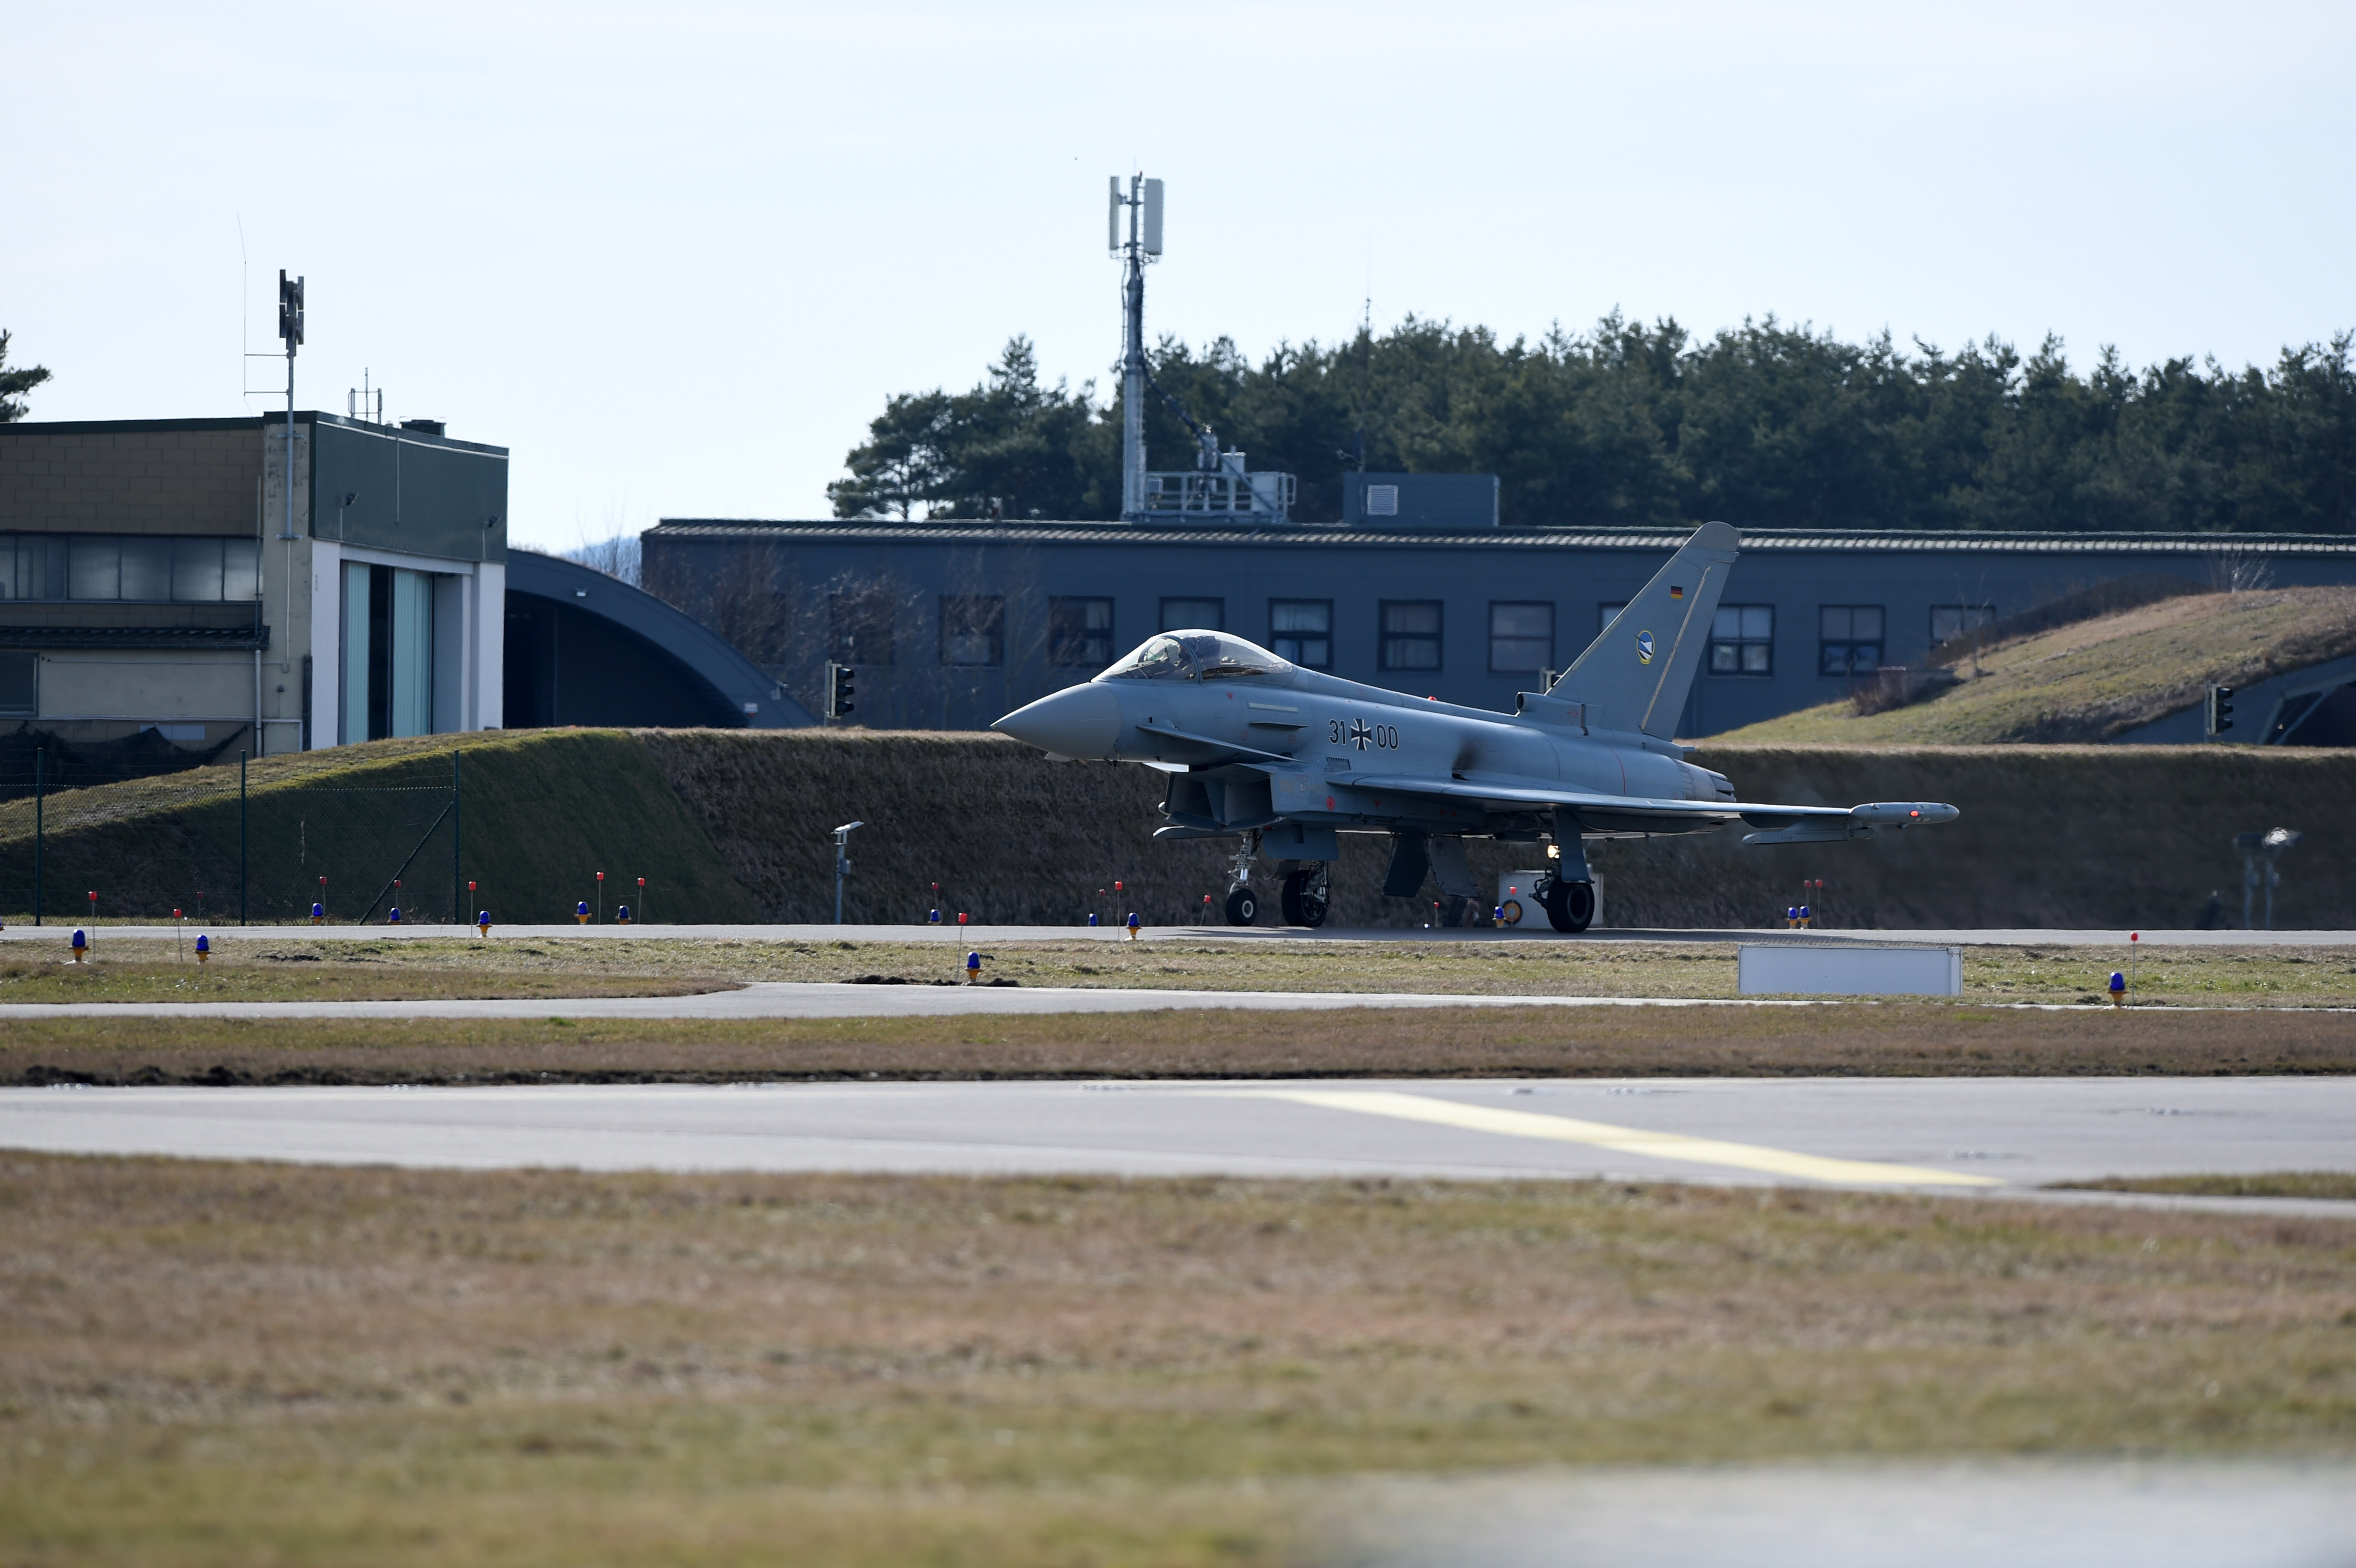 A Eurofighter stands at the air base in Neuburg an der Donau, Germany on February 24. In response to the growing tensions, the Bundeswehr is preparing to transfer more Eurofighters to Romania to protect NATO's southeastern flank. 